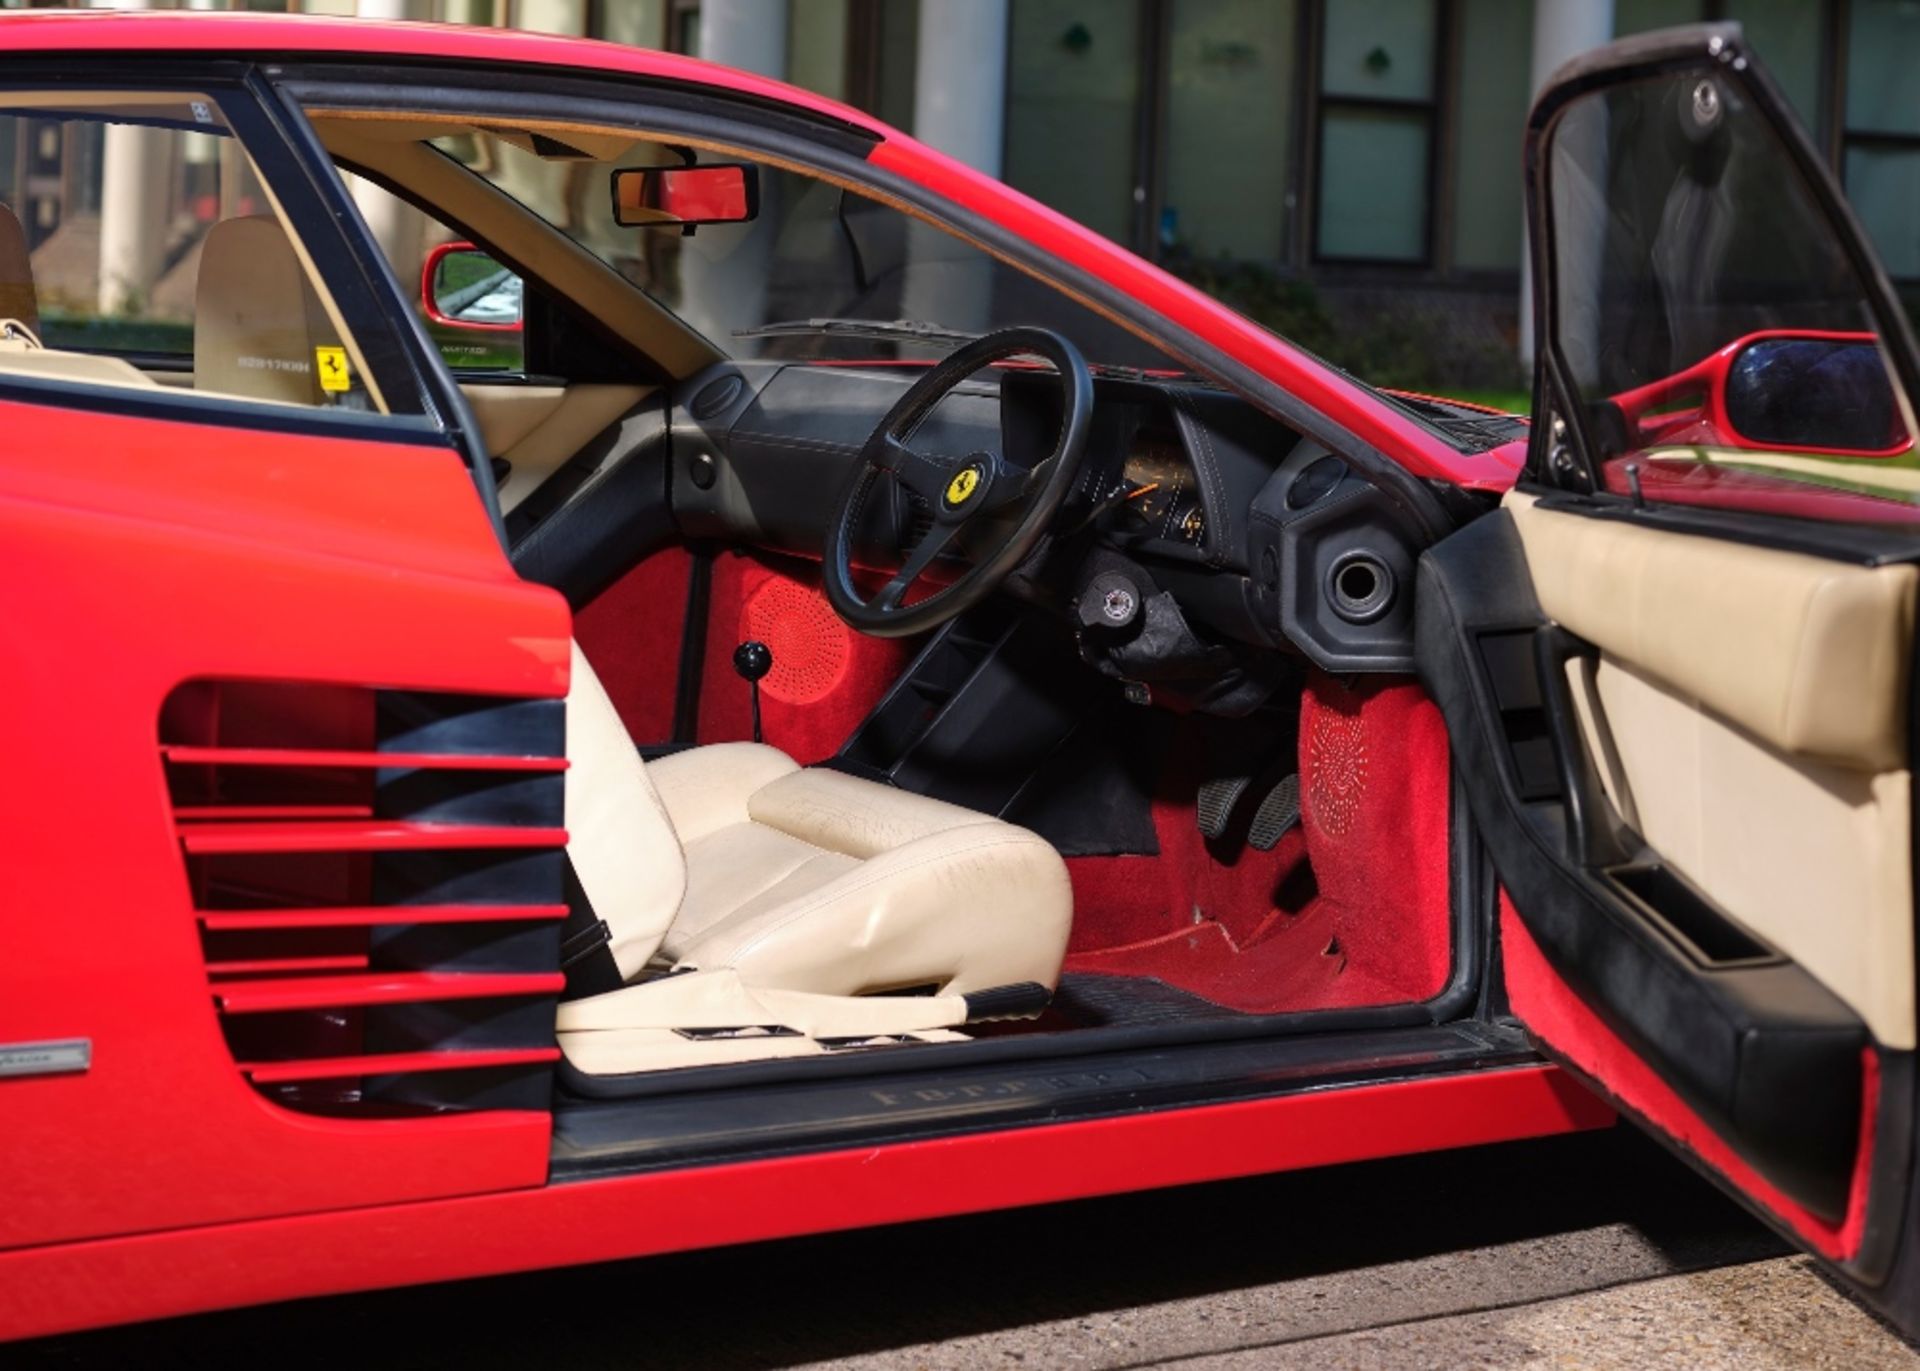 1989 FERRARI TESTAROSSA Registration Number: G441 WPN Chassis Number: ZFFAA17C000082817 Recorded - Image 21 of 59